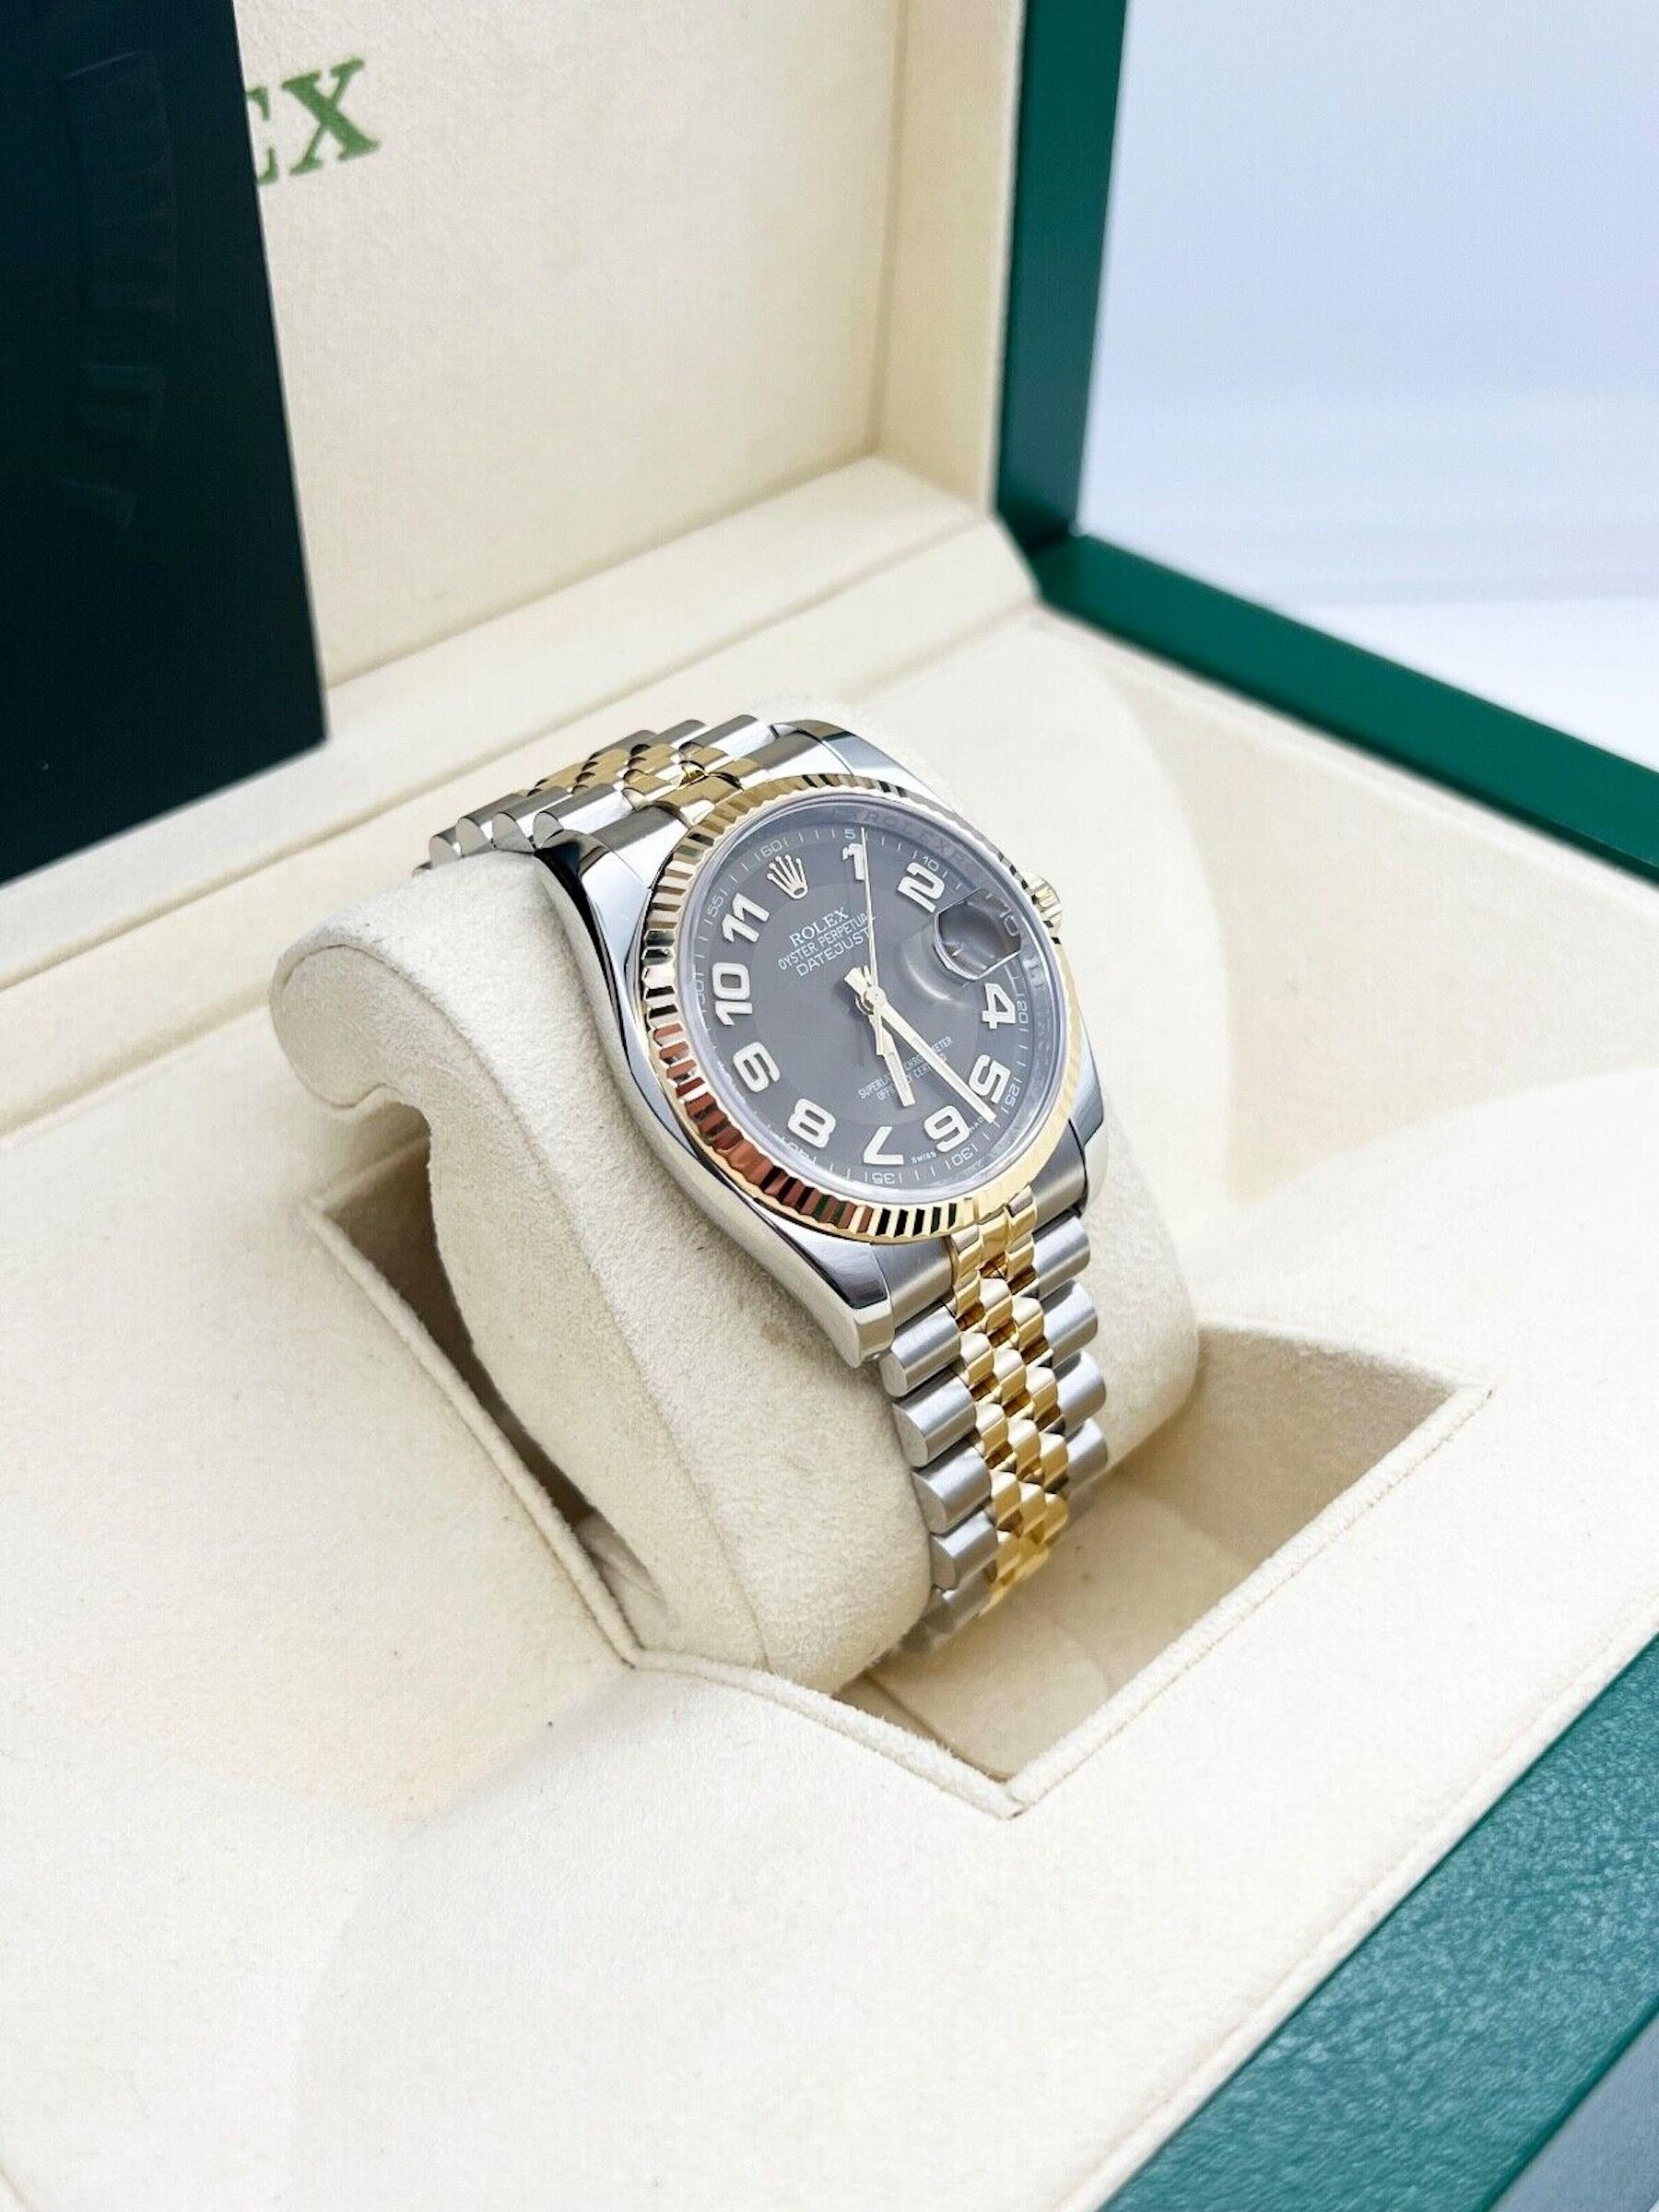 Rolex Datejust 116233 Bronze Arabic Dial 18K Gold Stainless Steel Box Paper For Sale 1